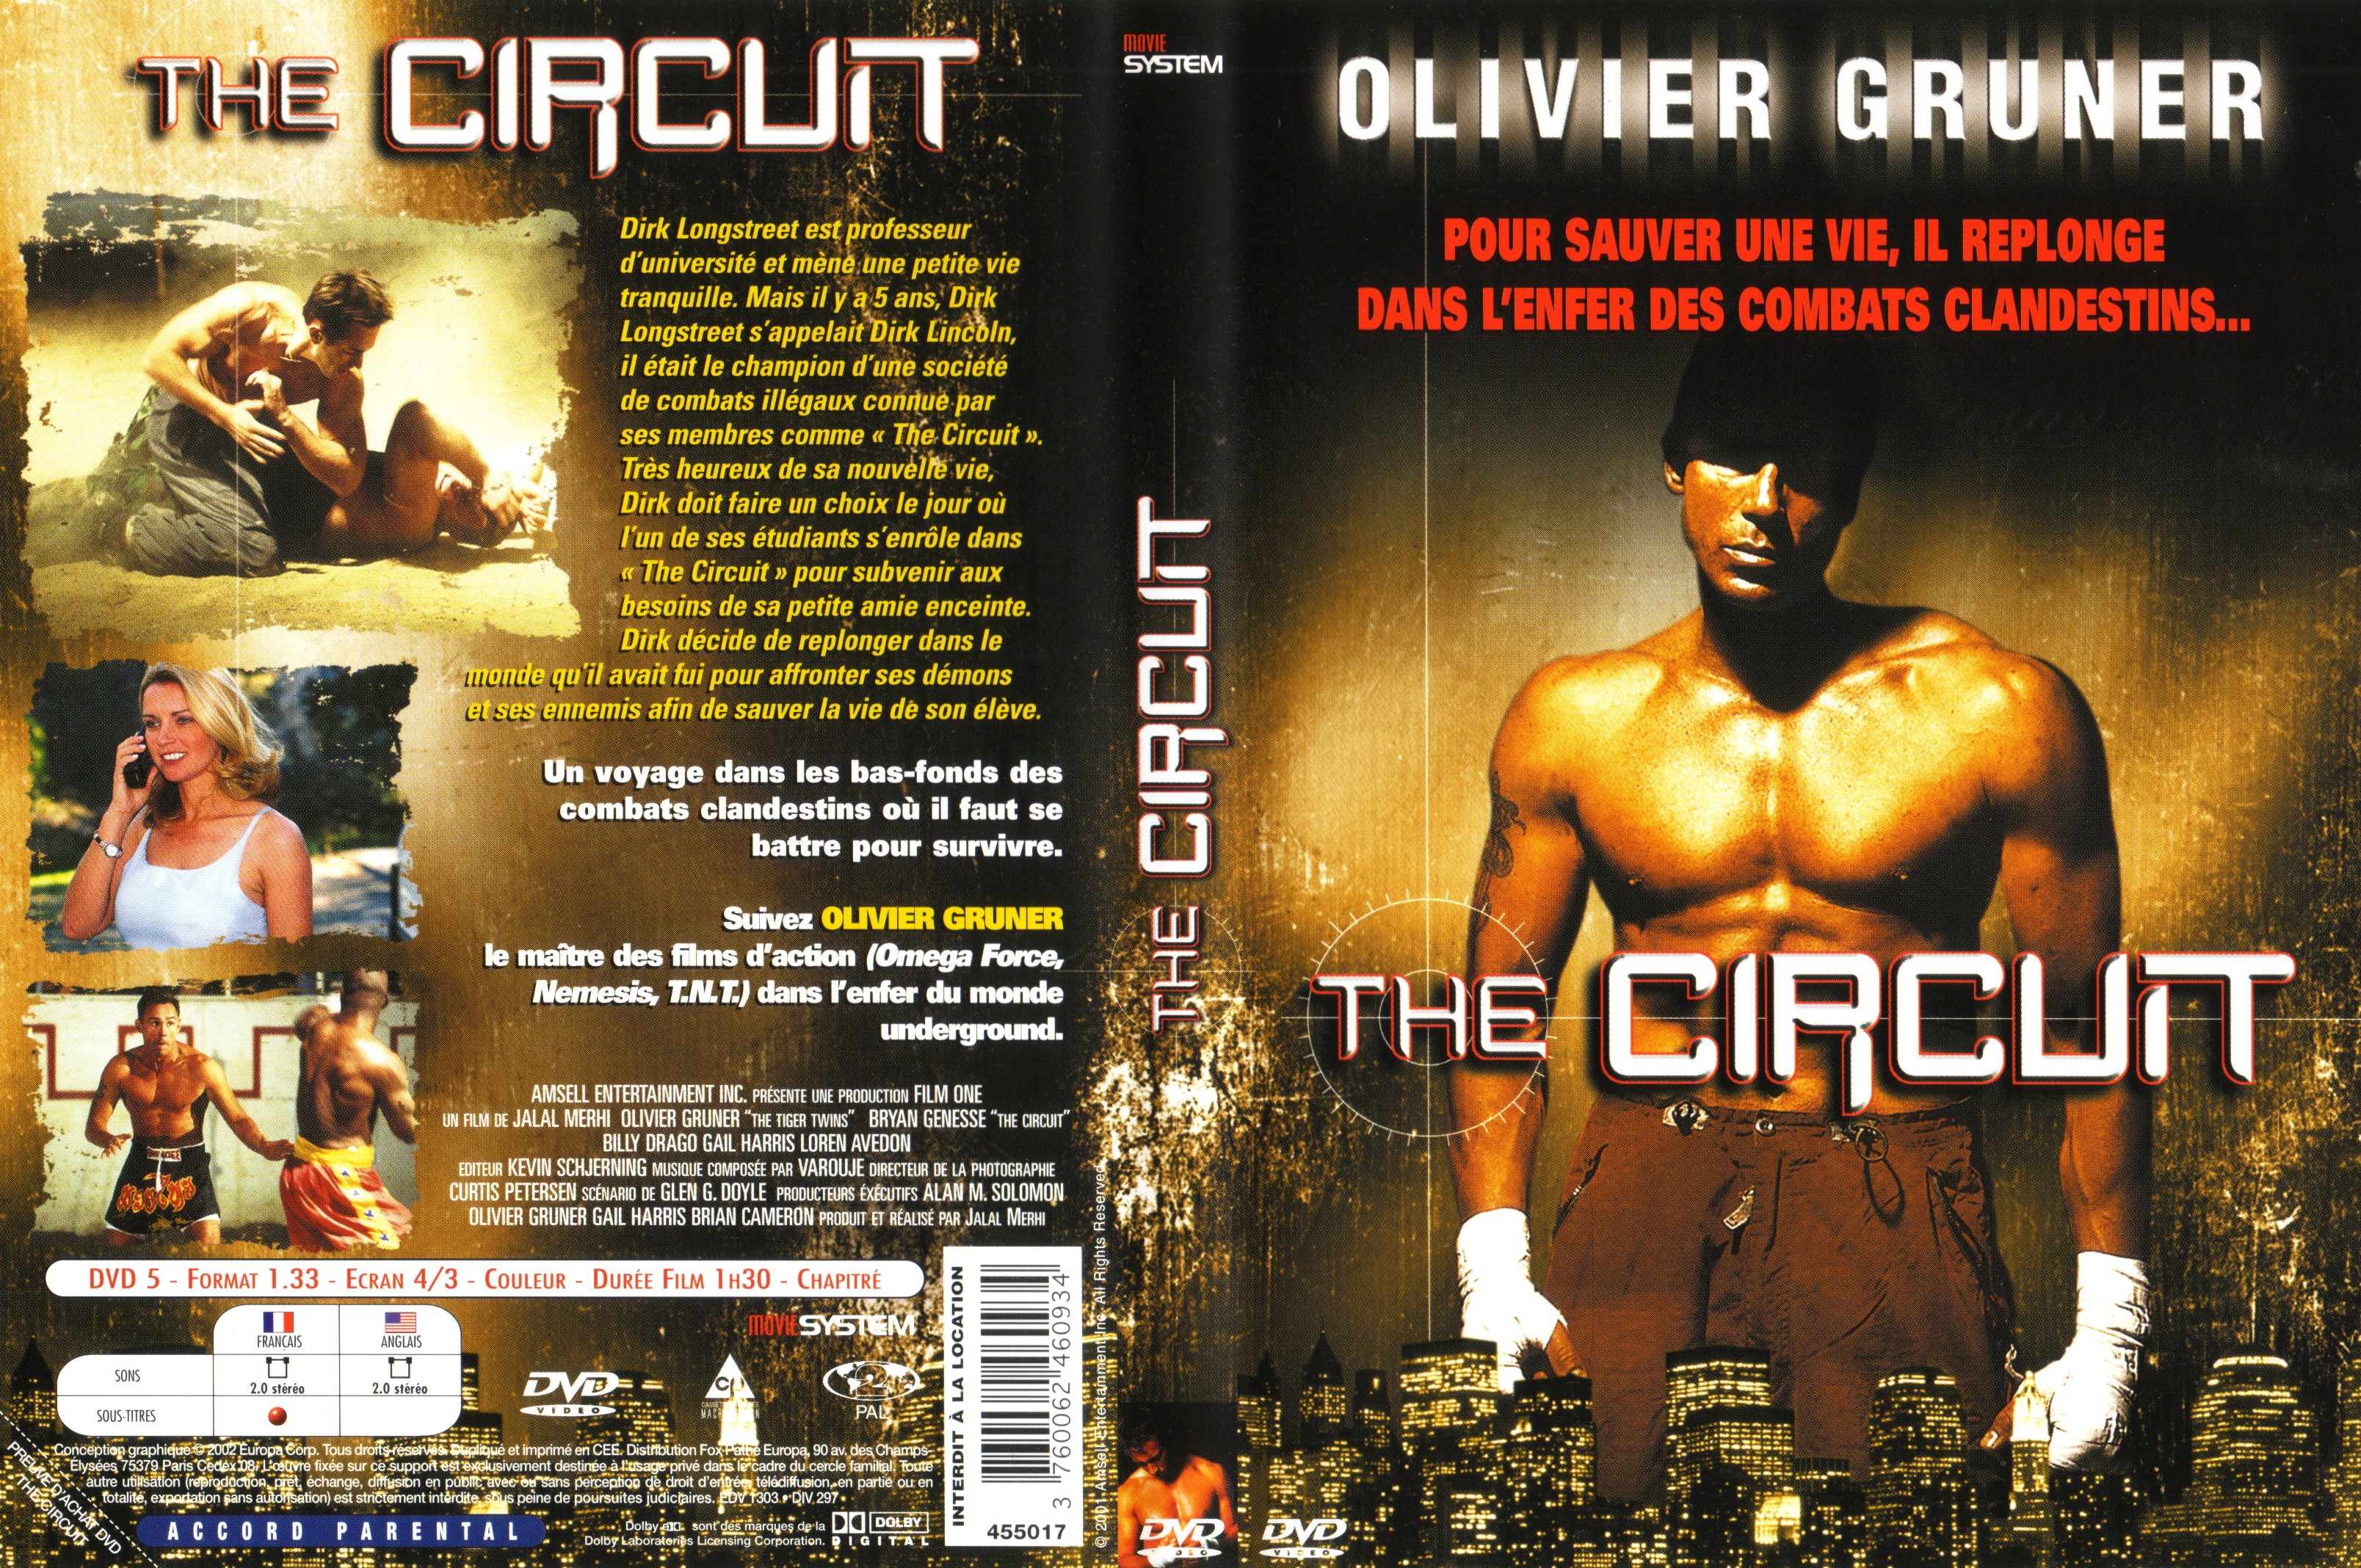 Jaquette DVD The circuit